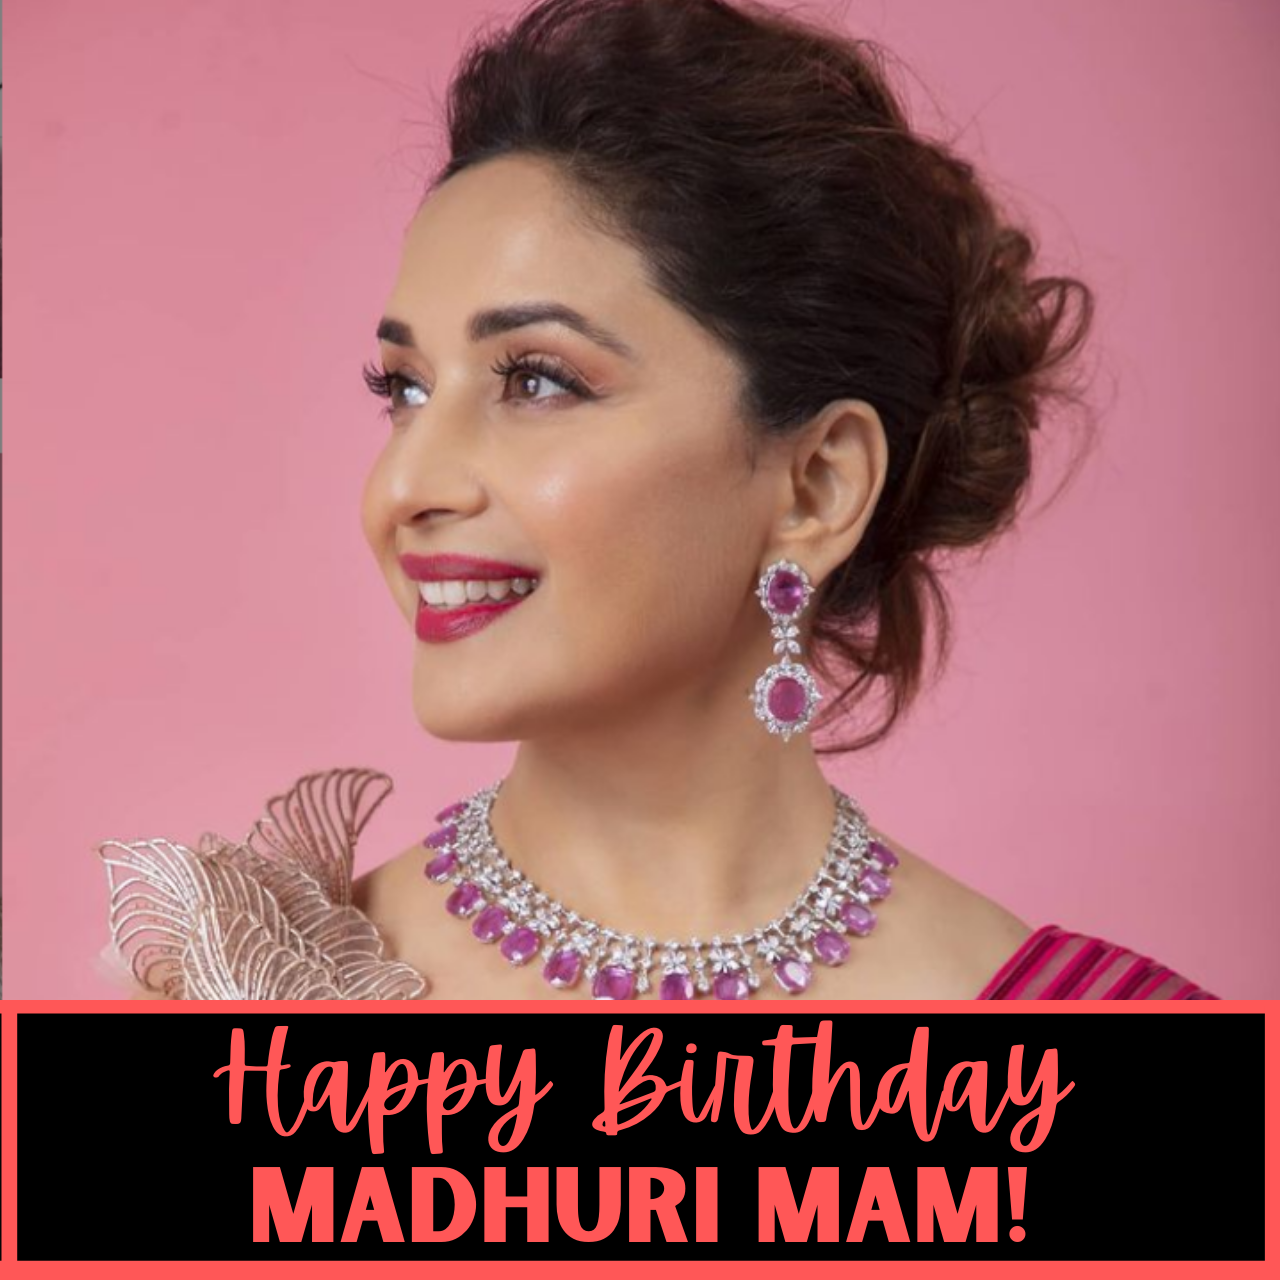 Happy Birthday Madhuri Dixit: Wishes, Images (photo), Video and Quotes to Share with Bubbly